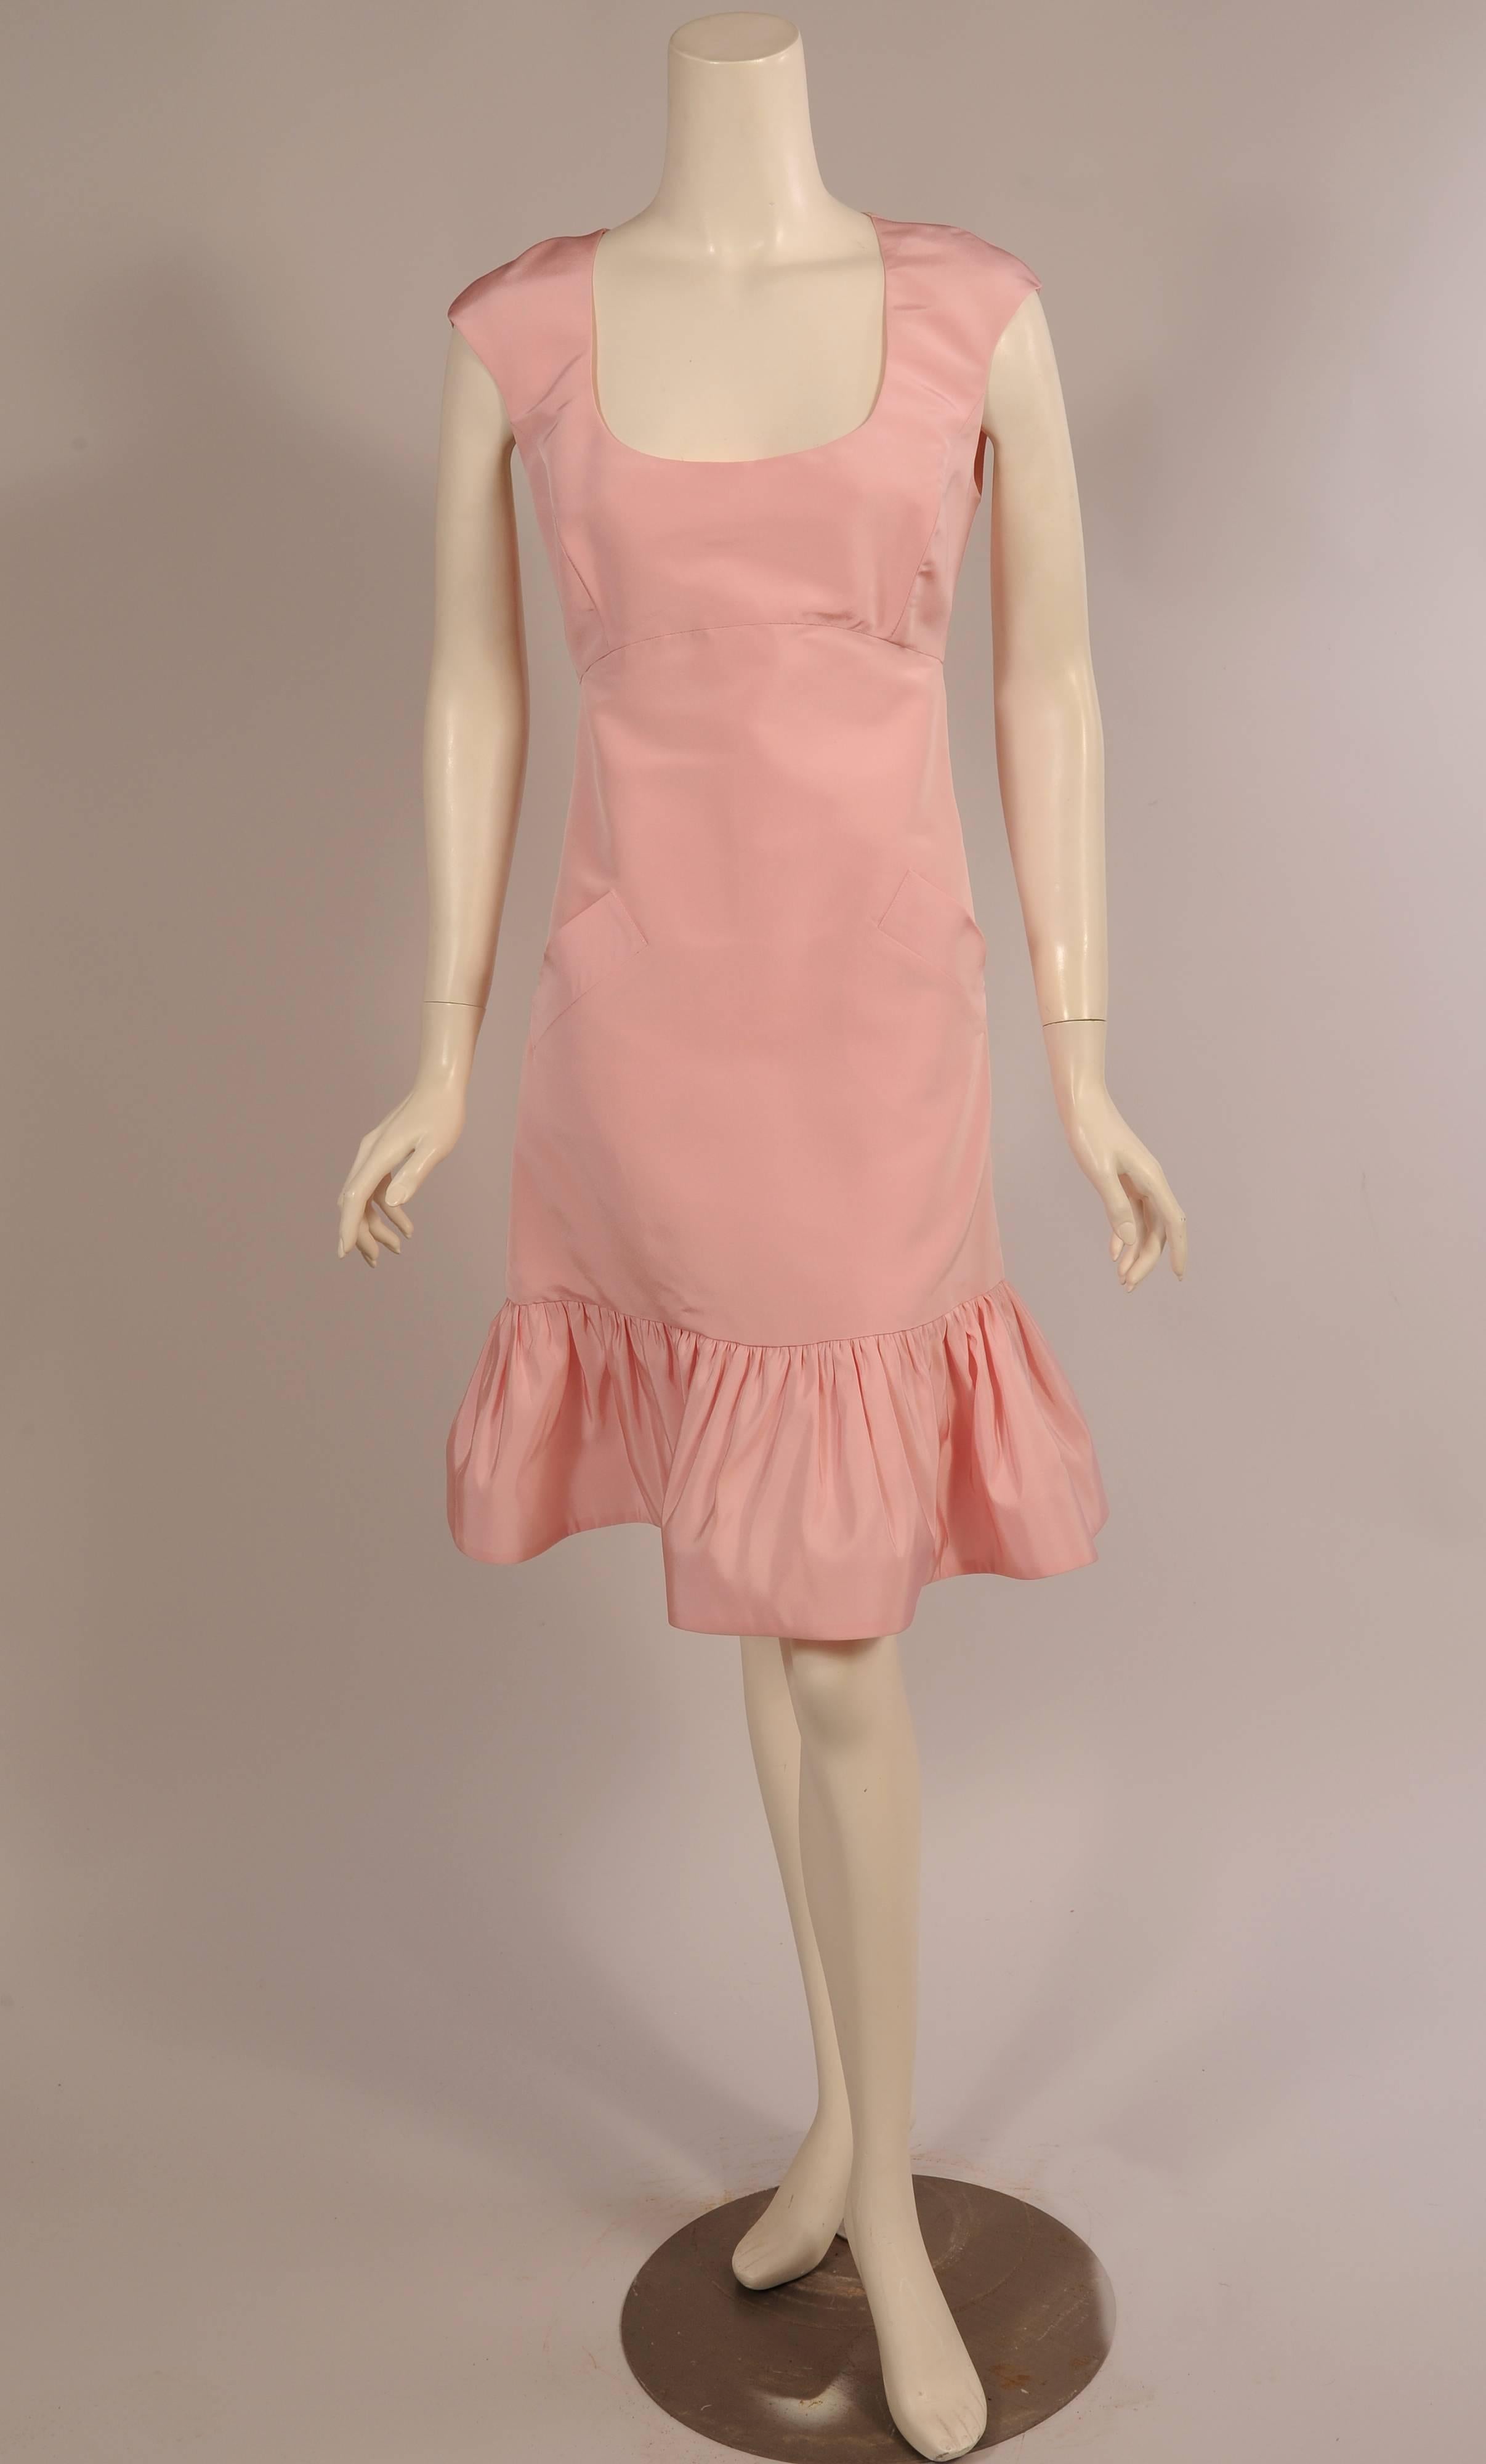 A beautiful pale pink silk faille dress with a scoop neckline, Empire waist, two slanted pockets and a flirty ruffled hem 
was designed by Osacr de la Renta. The dress has a center back zipper and is fully lined. It is marked a size 10 but please